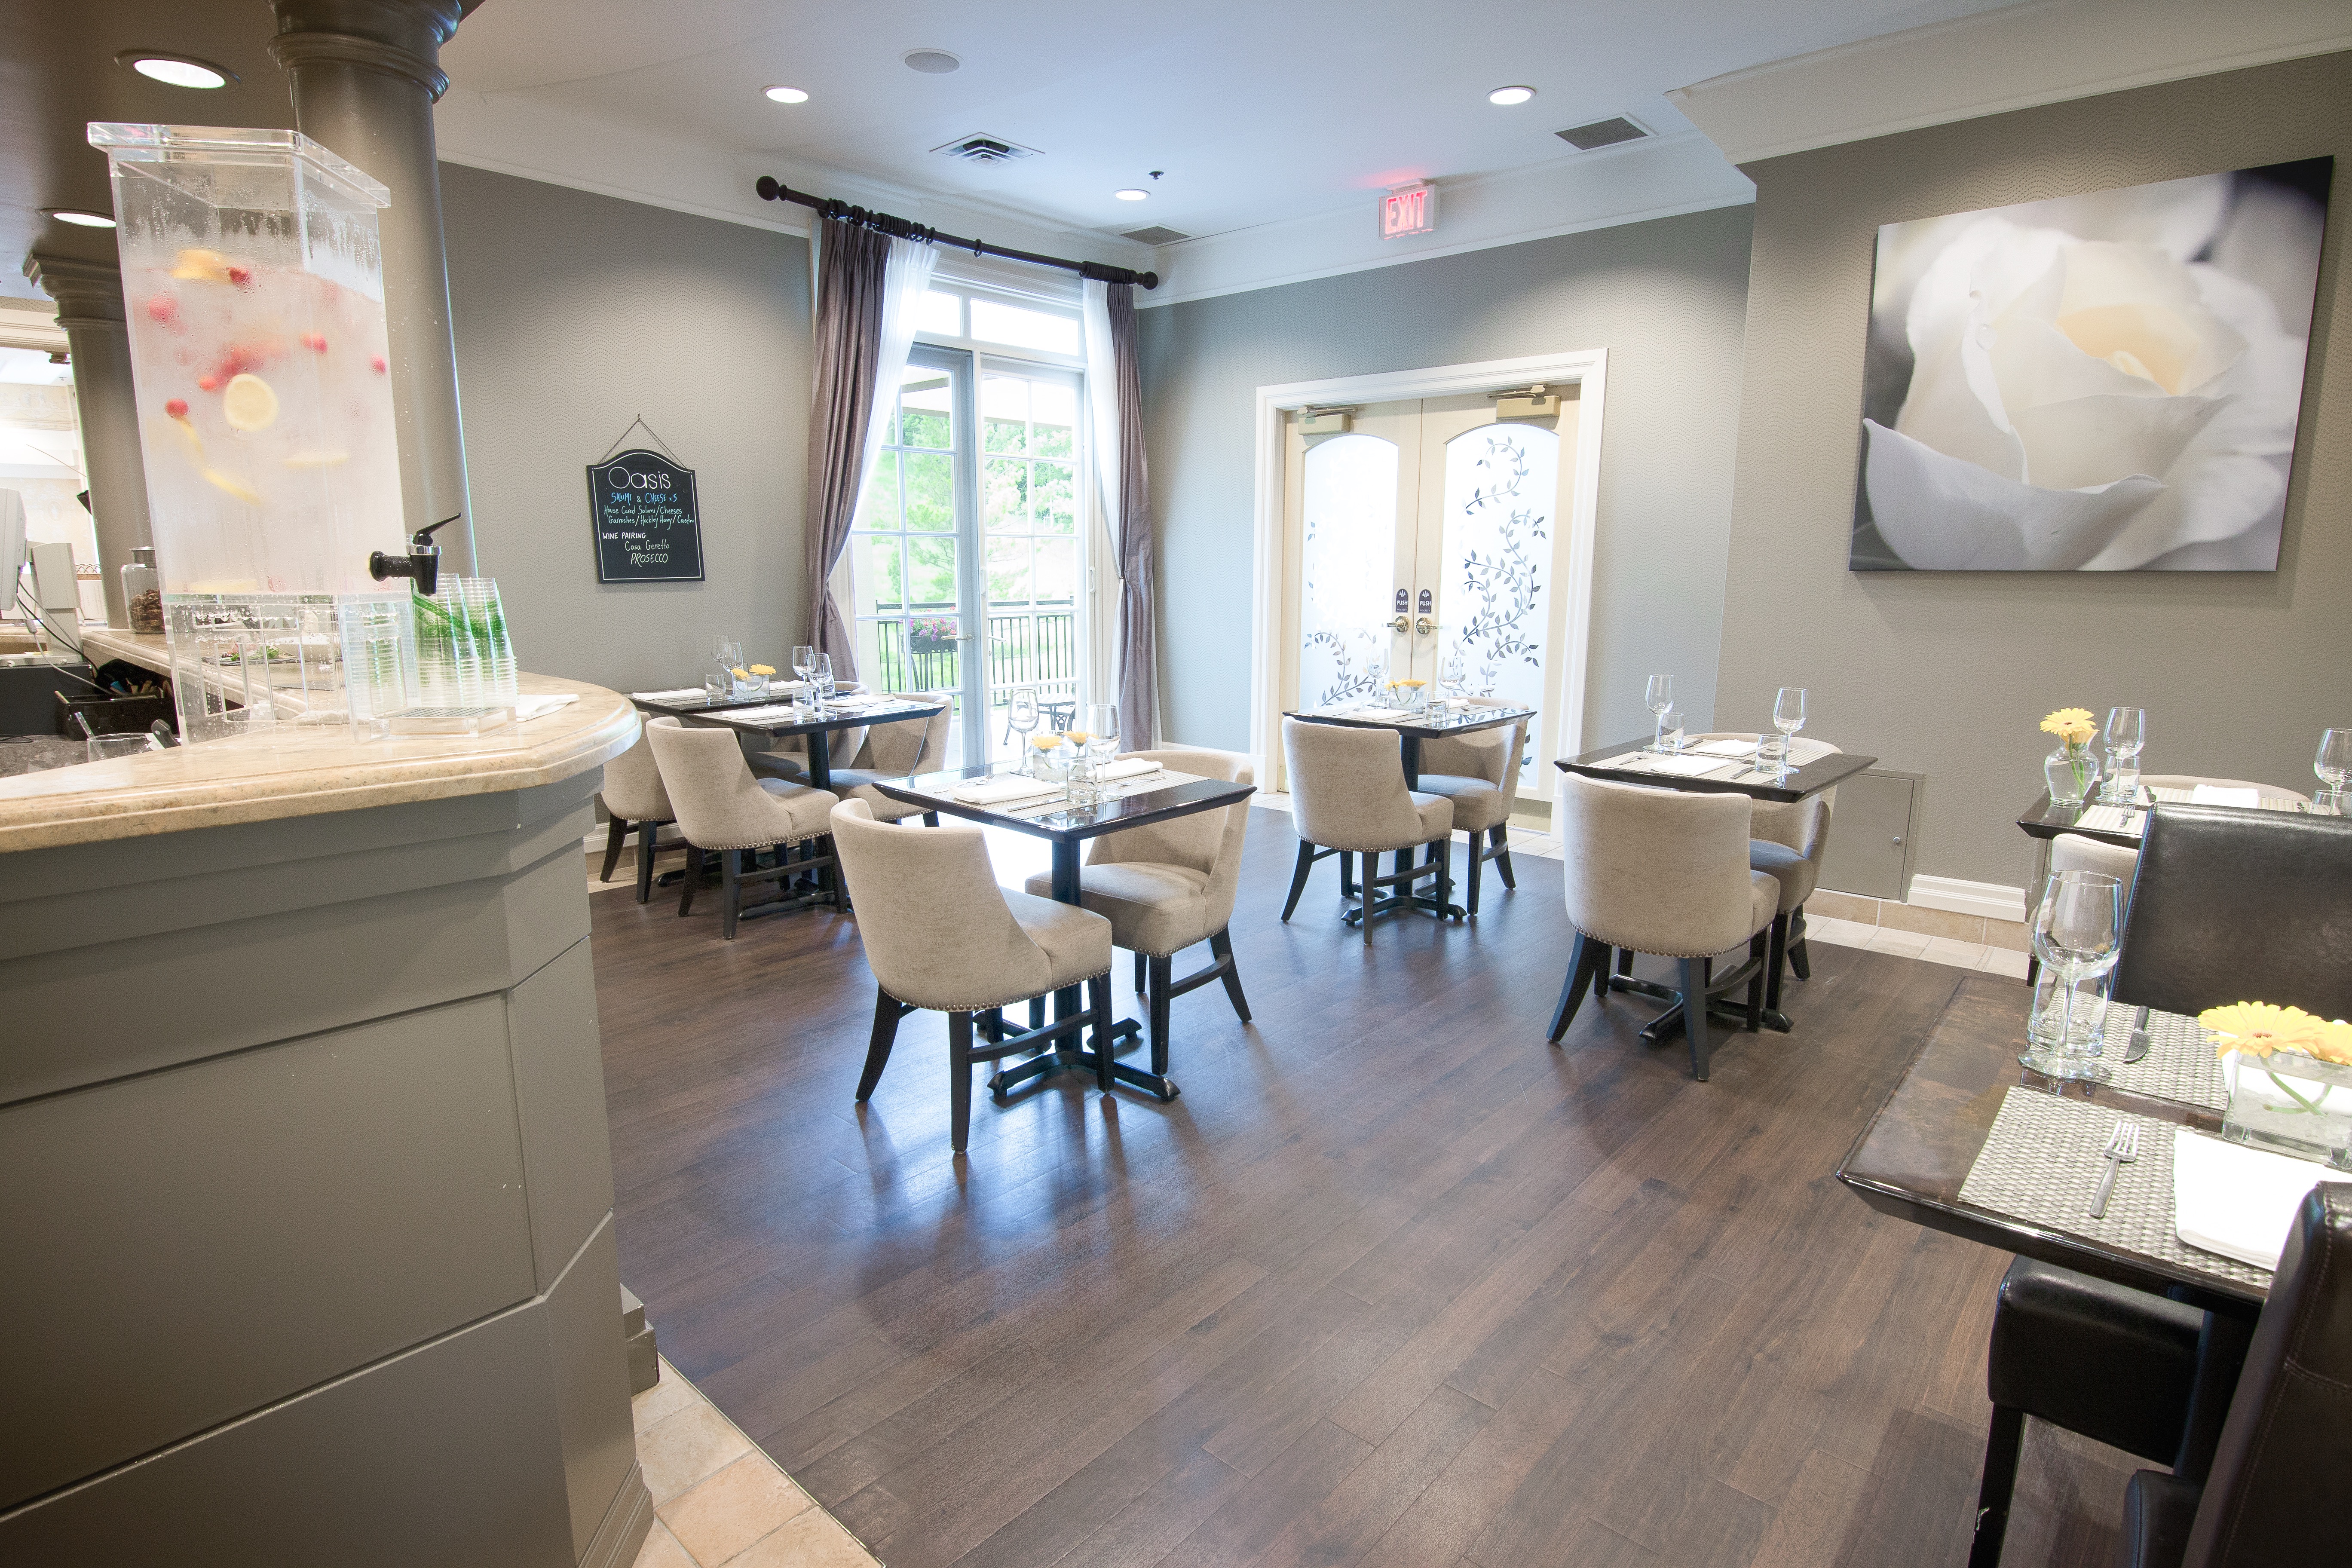 The Oasis Cafe in Hockley Valley Resort Spa is the perfect place for a bite to eat post-treatment. The best part? Dining in your robe of course!